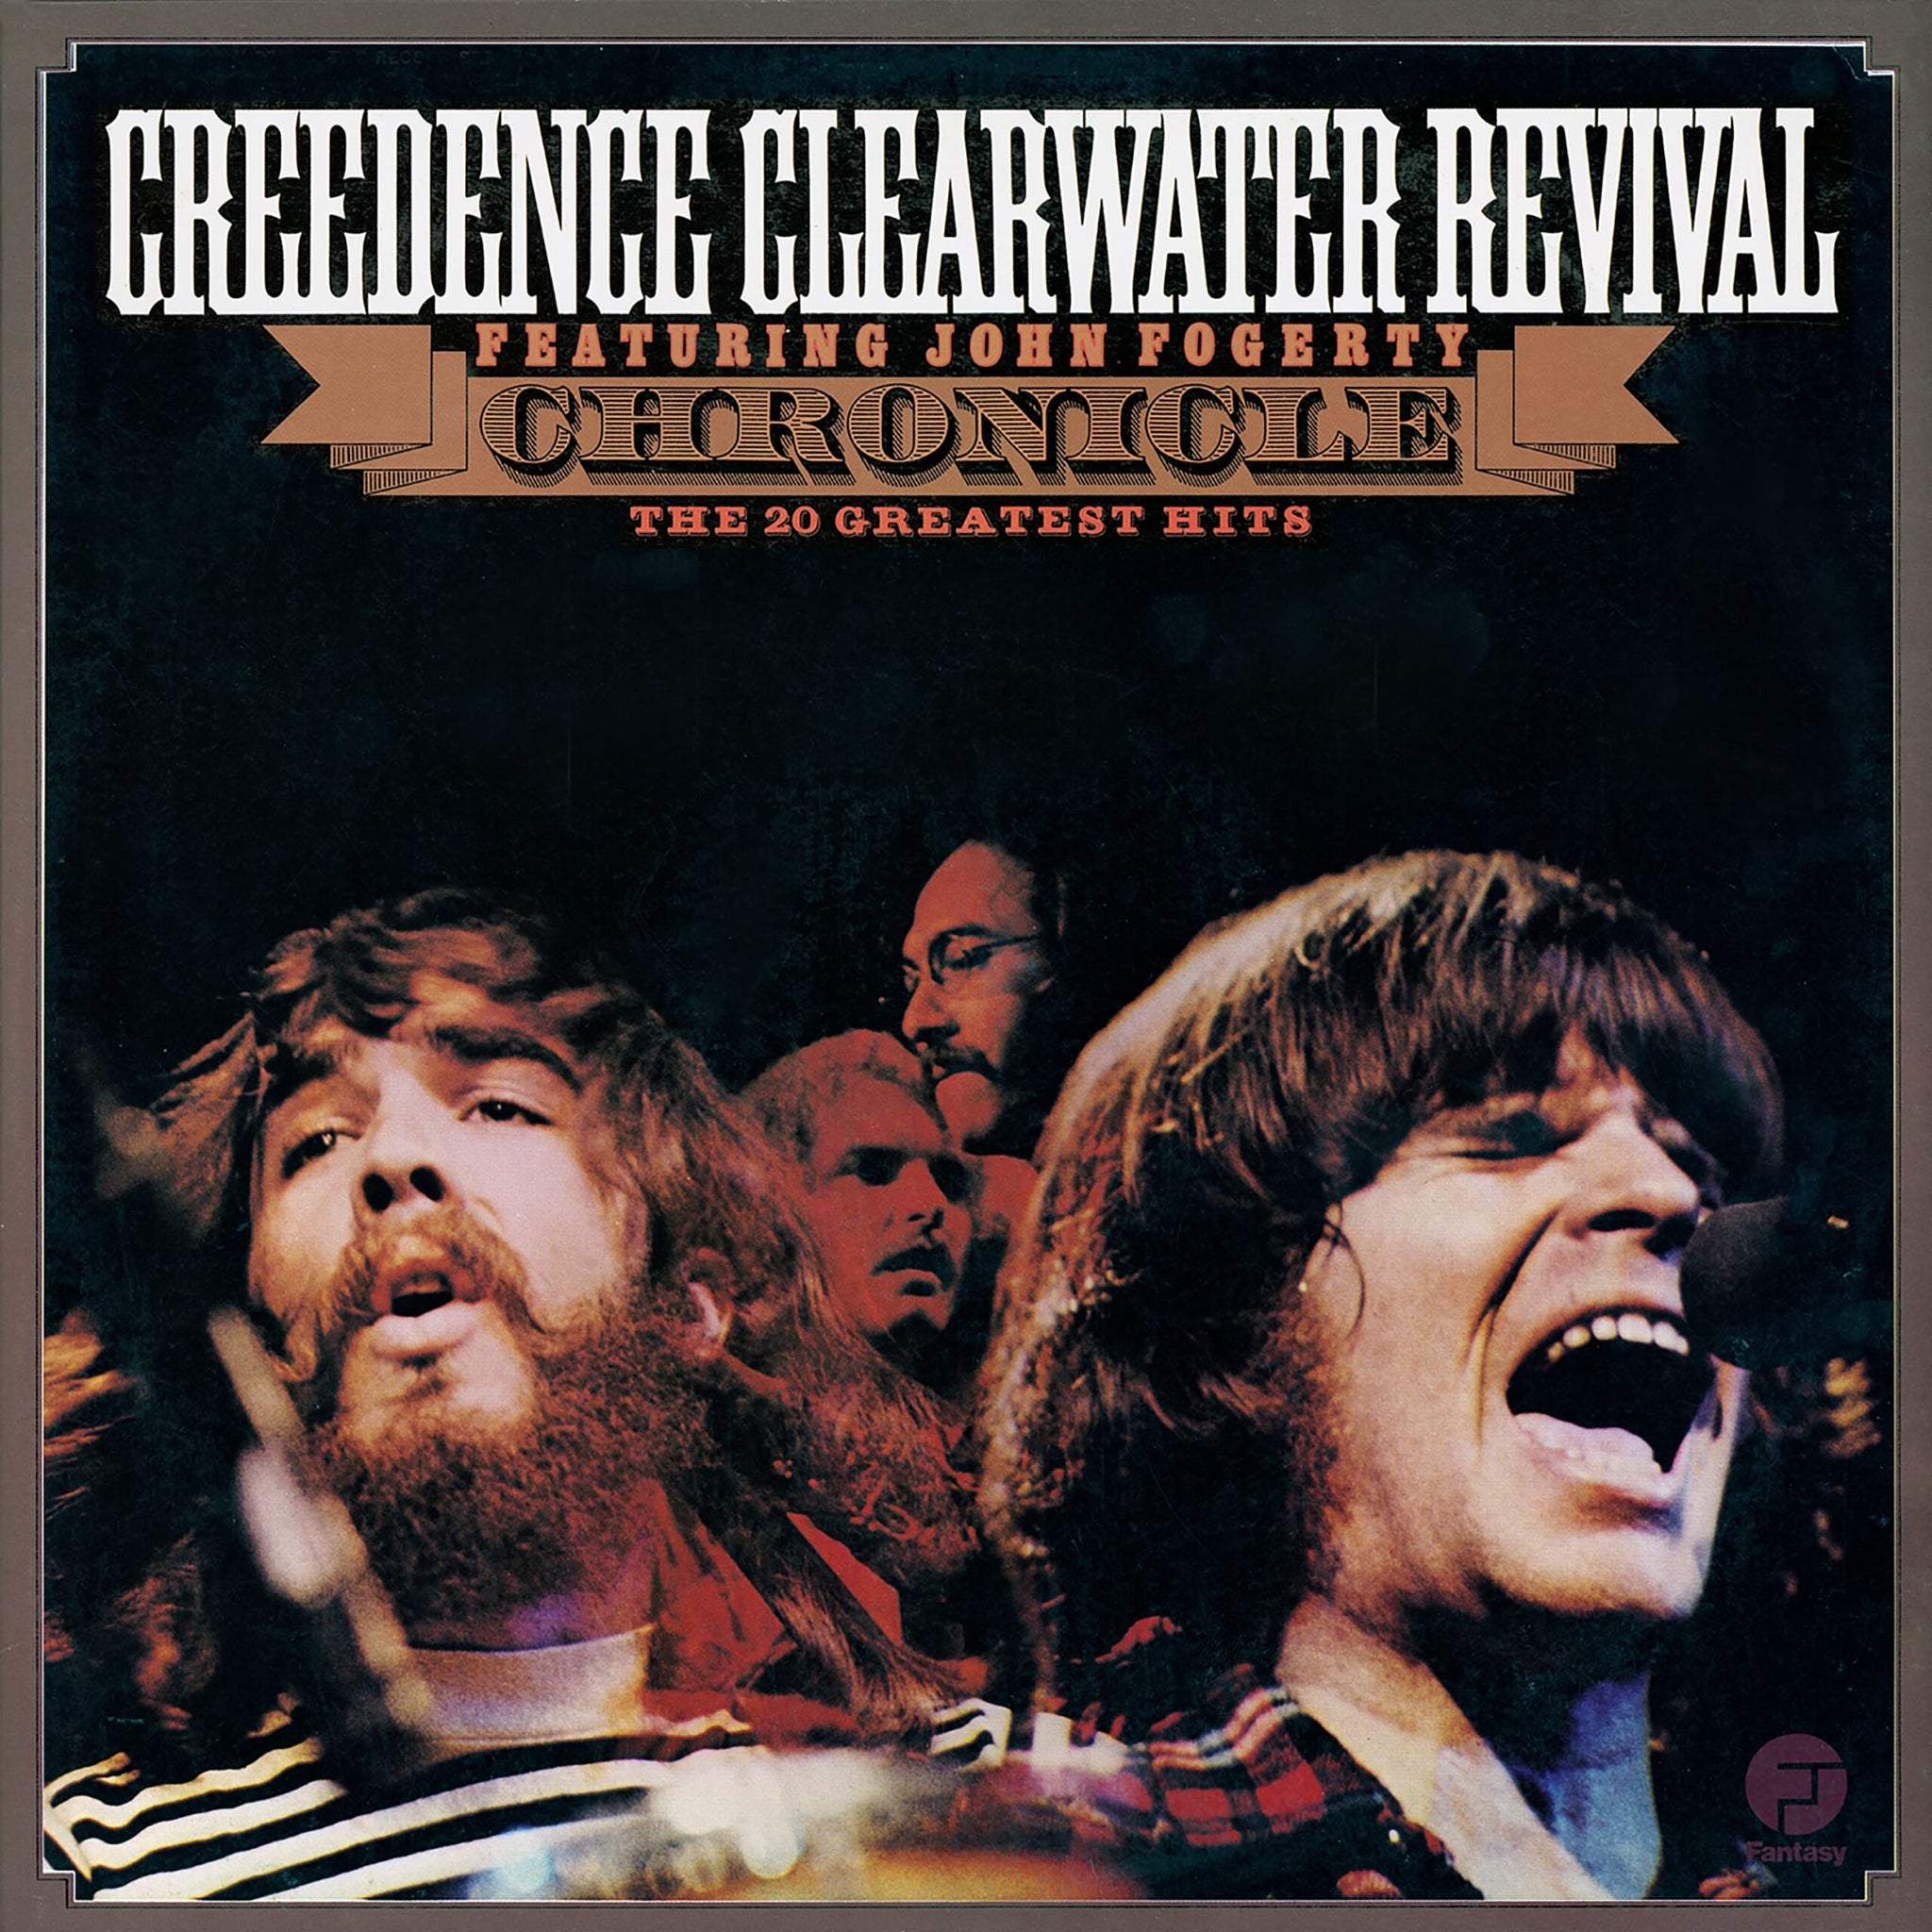 CREEDENCE CLEARWATER REVIVAL - Chronicle: The 20 Greatest Hits - 2LP - Vinyl